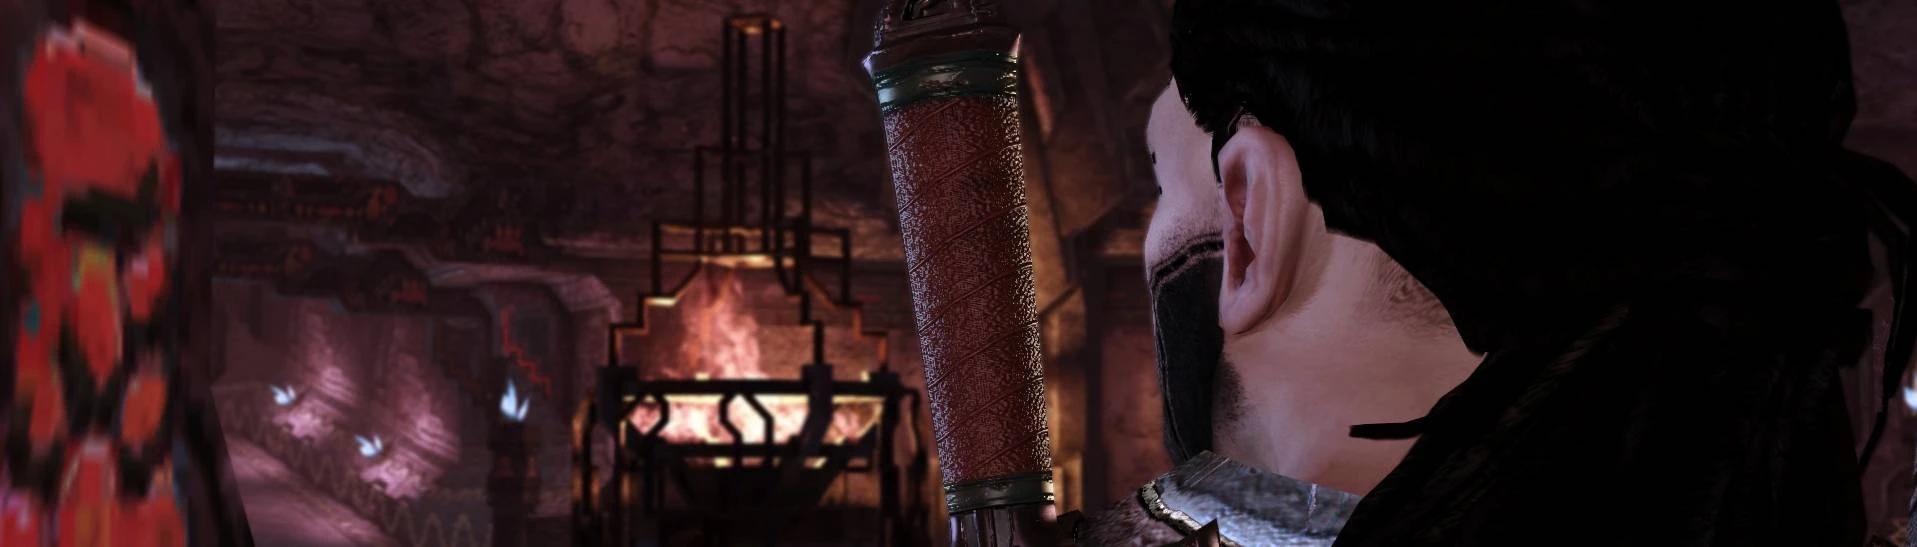 Dragon Age: Origins Updated Hands-On - The Dwarf Commoner's Humble